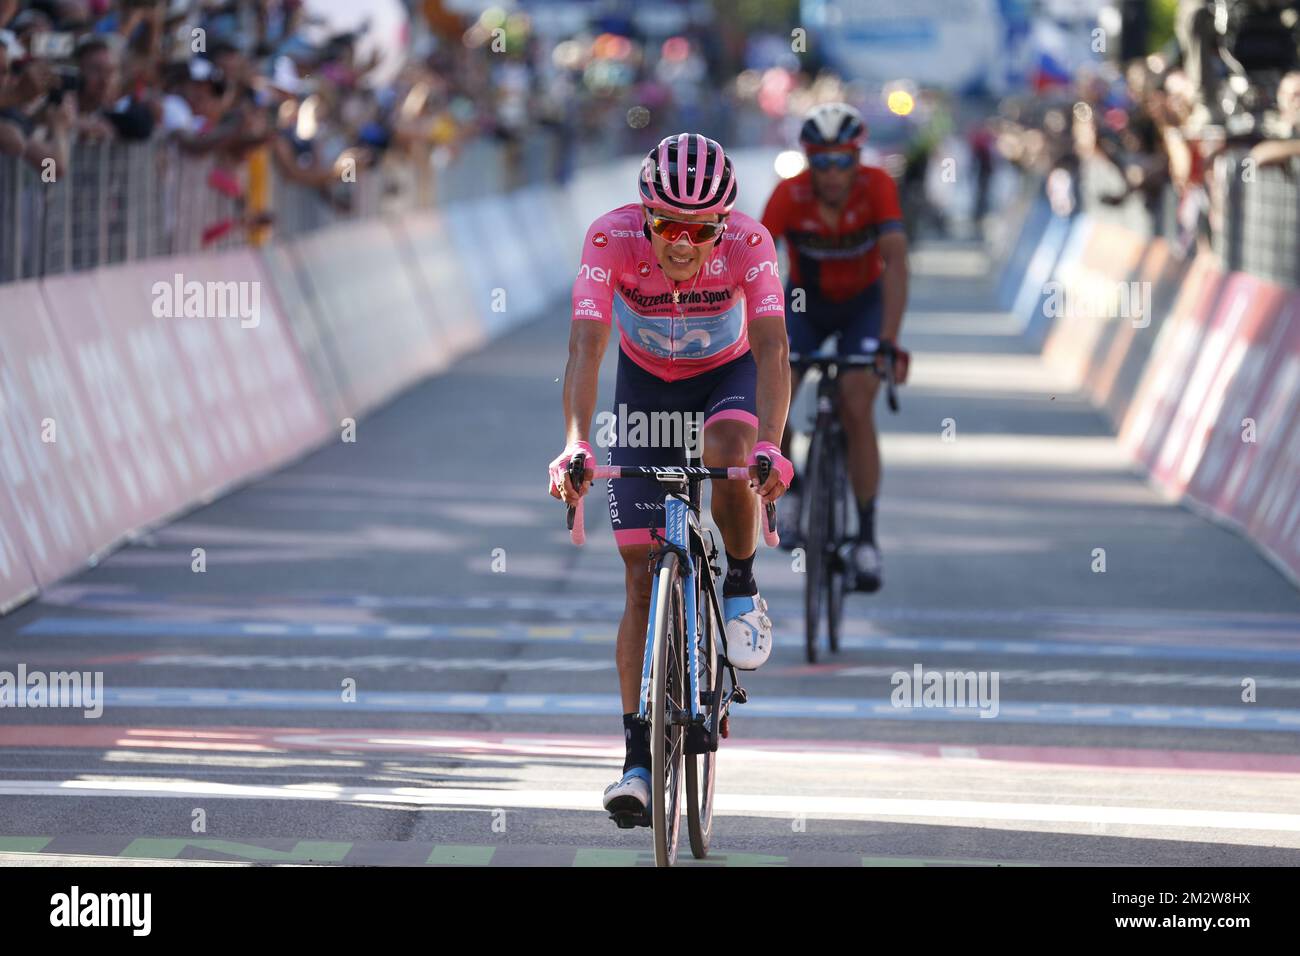 Ecuadorian Richard Carapaz of Movistar Team crosses the finish line of the twentieth stage of the 101st edition of the Giro D'Italia cycling race, 194km from Feltre to Croce d'Aune-Monte Avena, Italy, Saturday 01 June 2019. BELGA PHOTO YUZURU SUNADA FRANCE OUT  Stock Photo